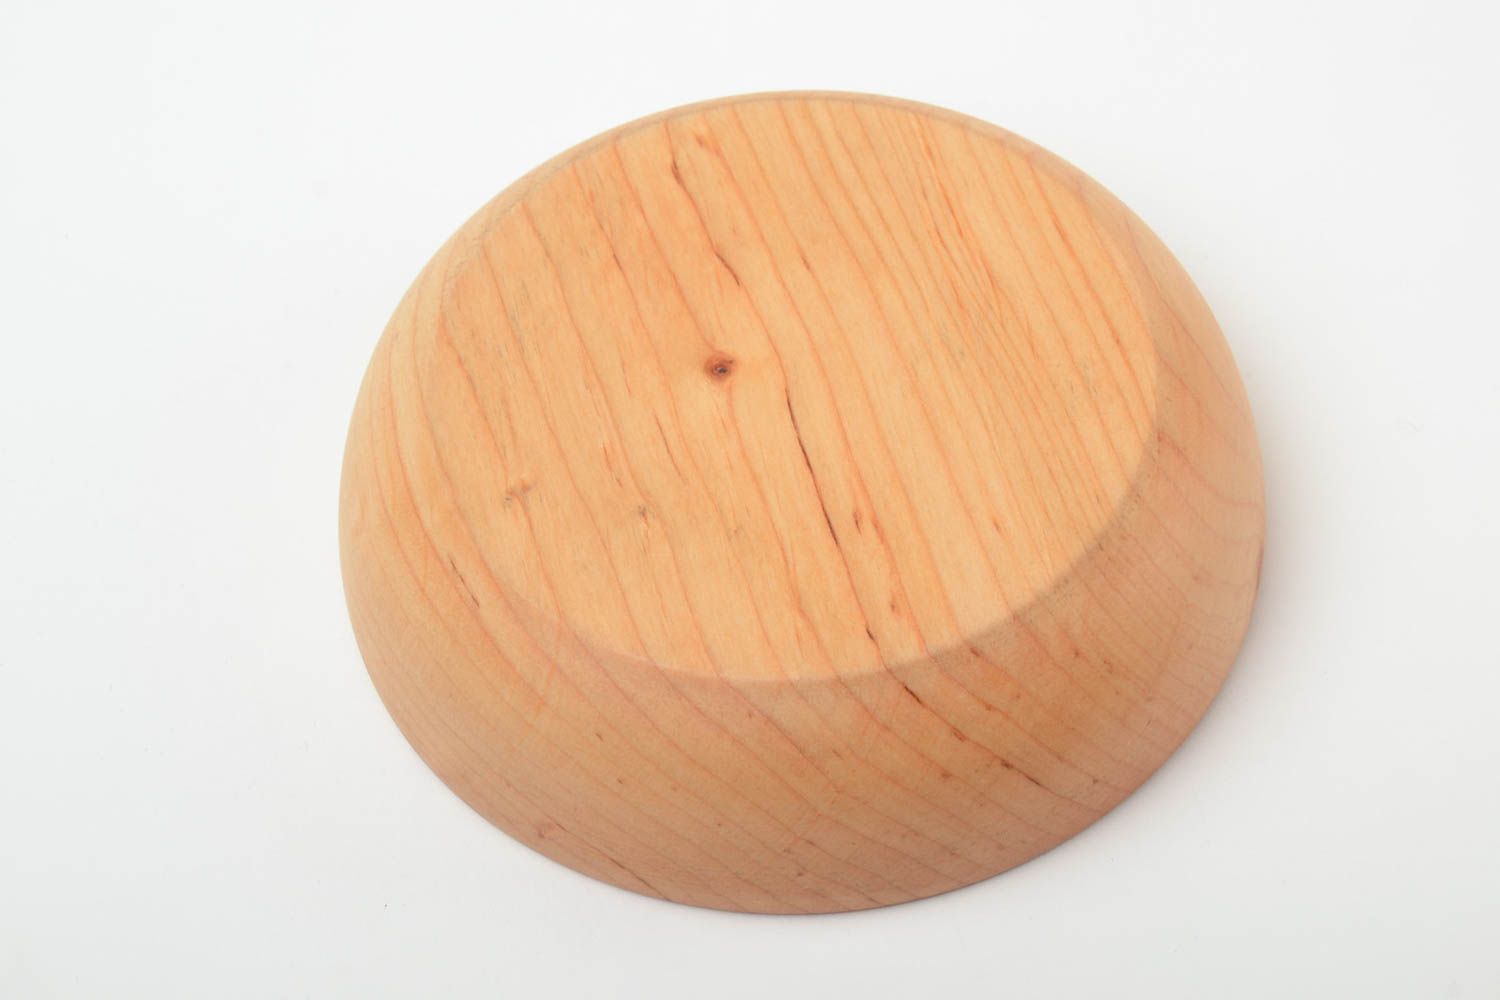 Handmade decorative bowl 150 ml made of alder wood impregnated with linseed oil photo 4